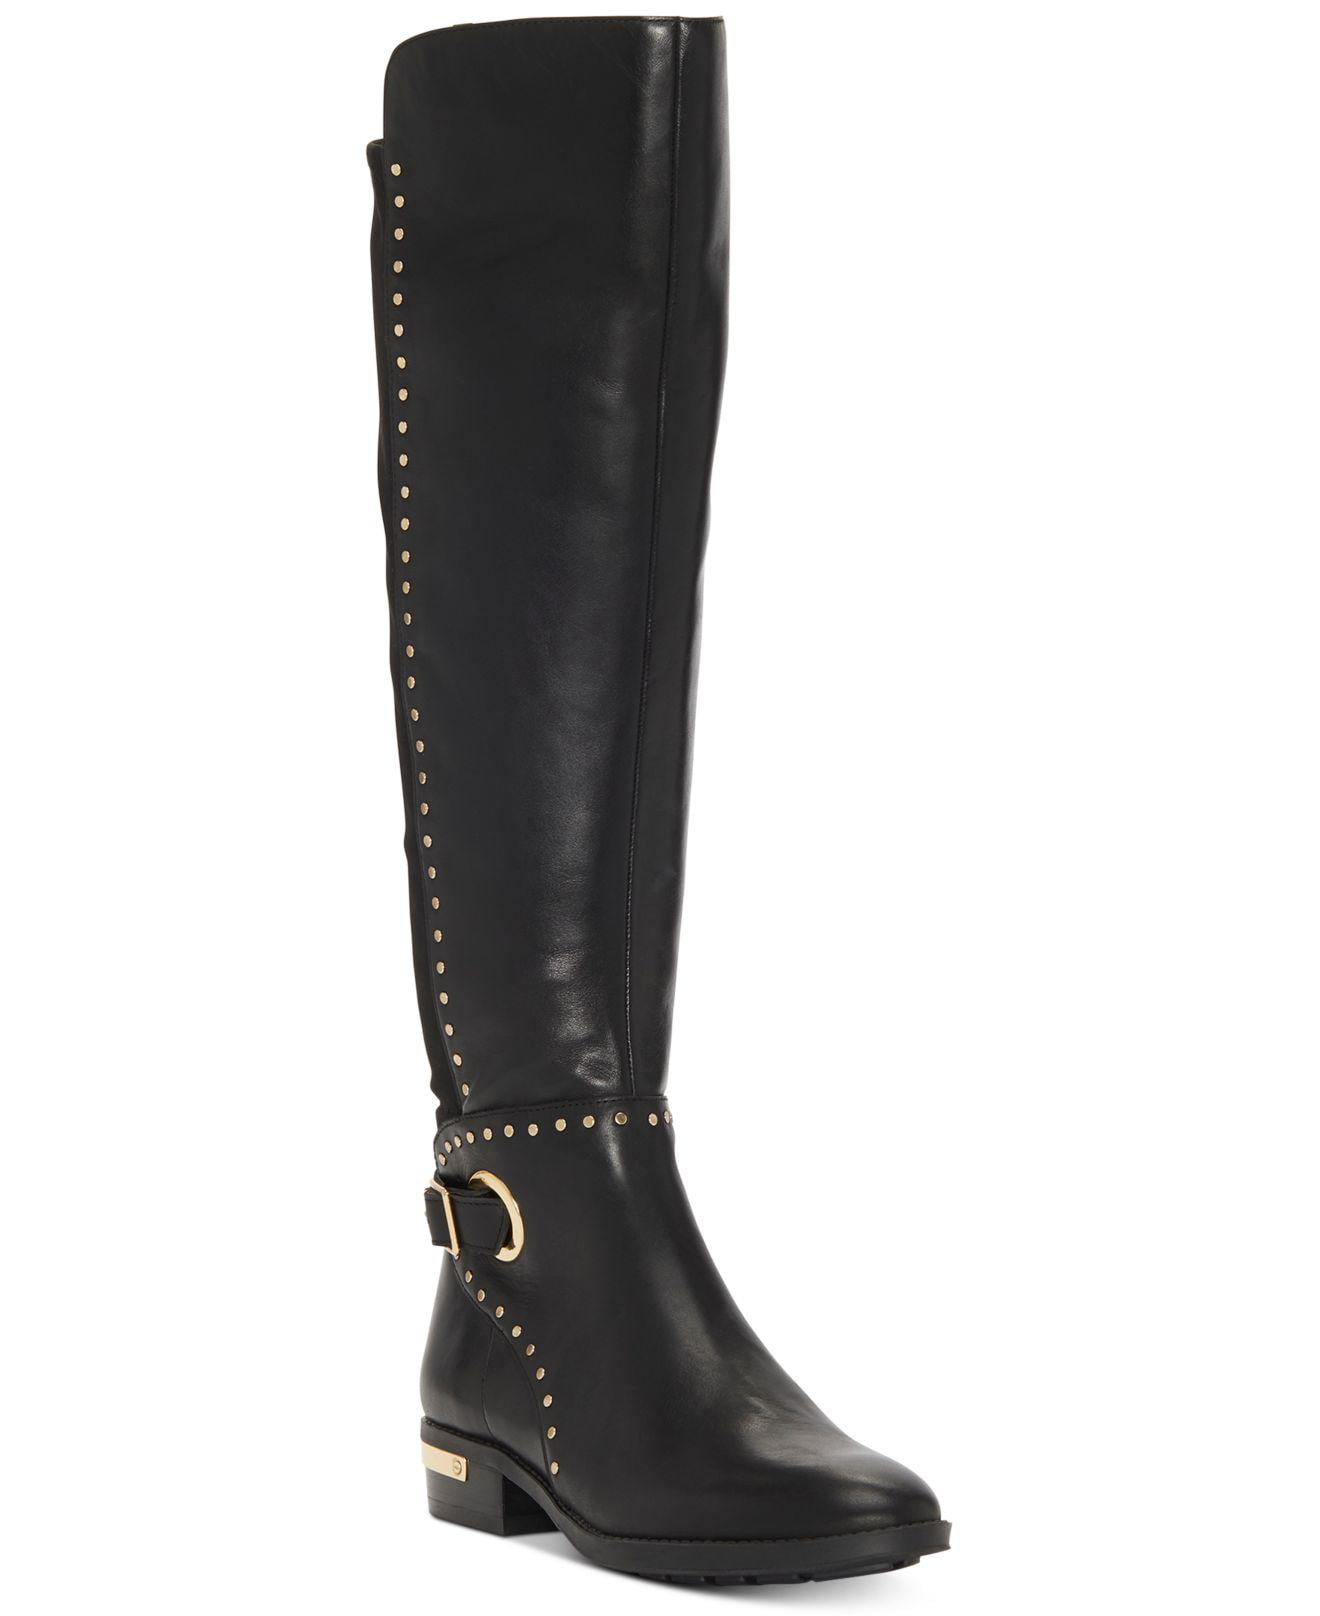 black and gold riding boots